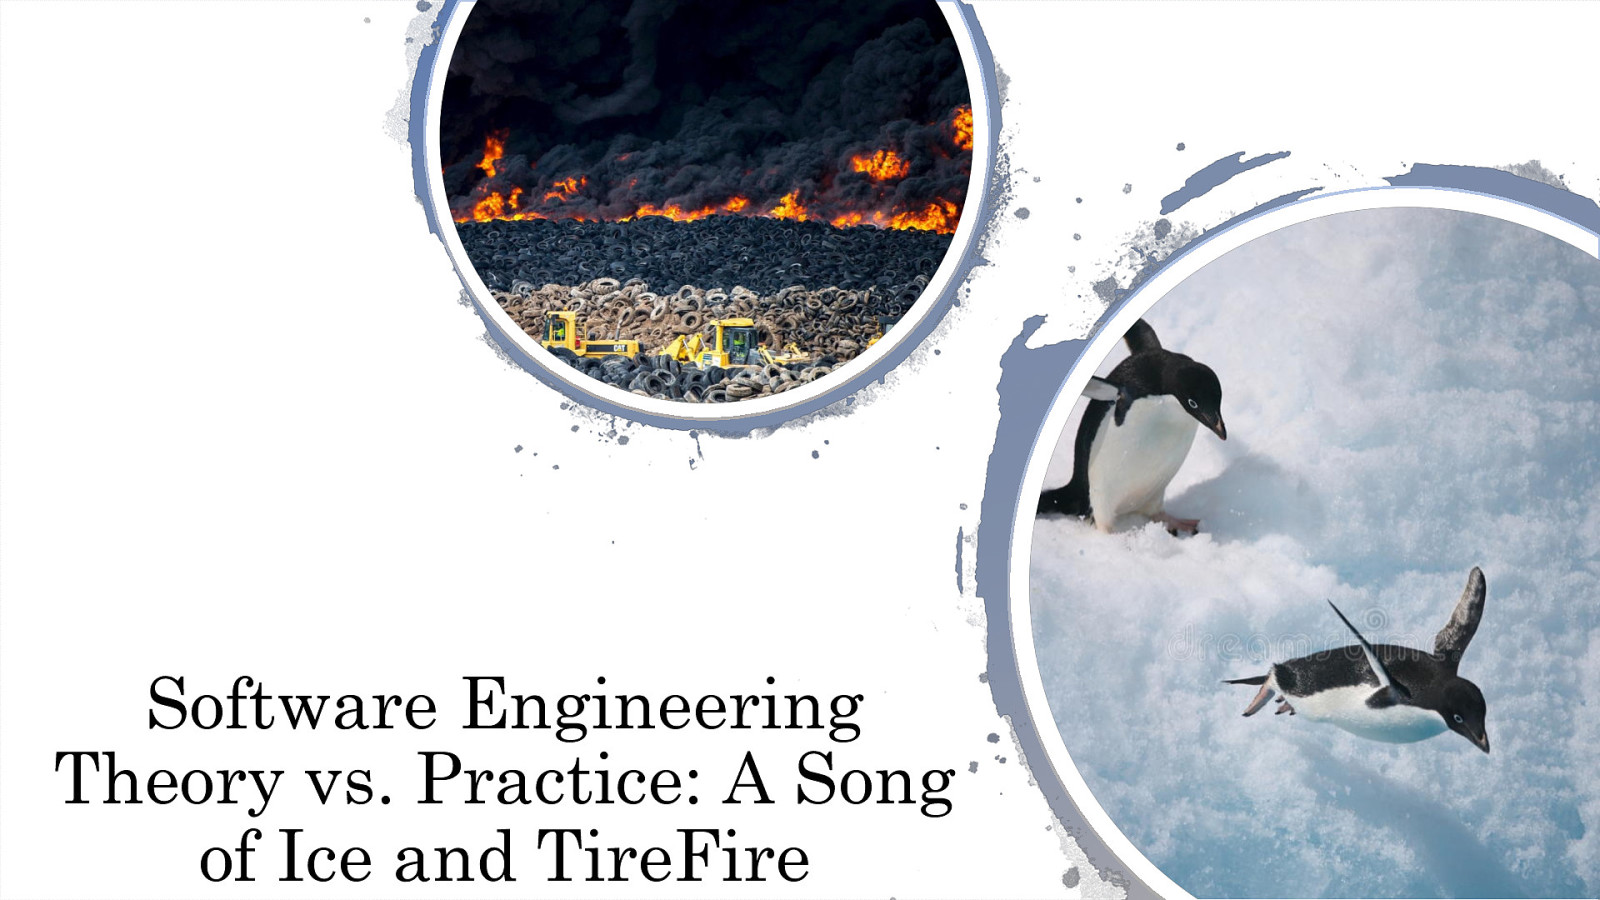 DevOps Theory vs. Practice: A Song of Ice and TireFire